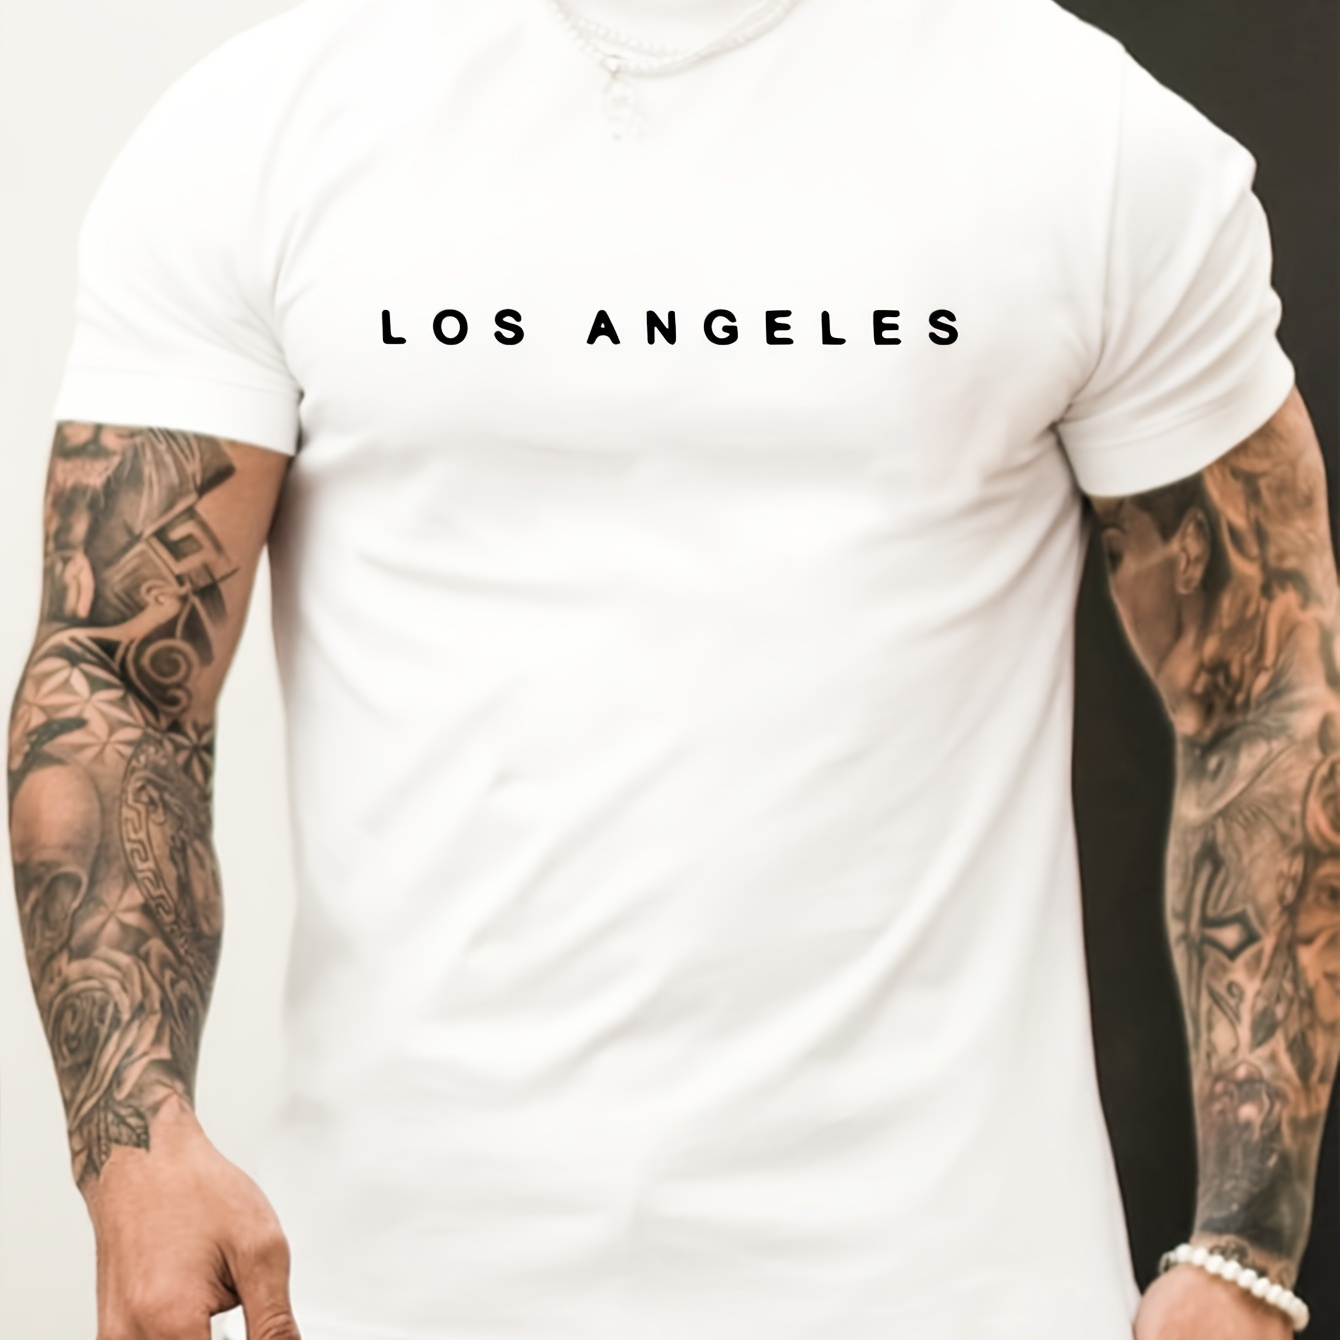 

Los Angeles " Trendy Print Casual Short-sleeved Cotton T-shirt For Men, Spring And Summer Top, Comfortable Round Neck Tee, Regular Fit, Versatile Fashion For Everyday Wear